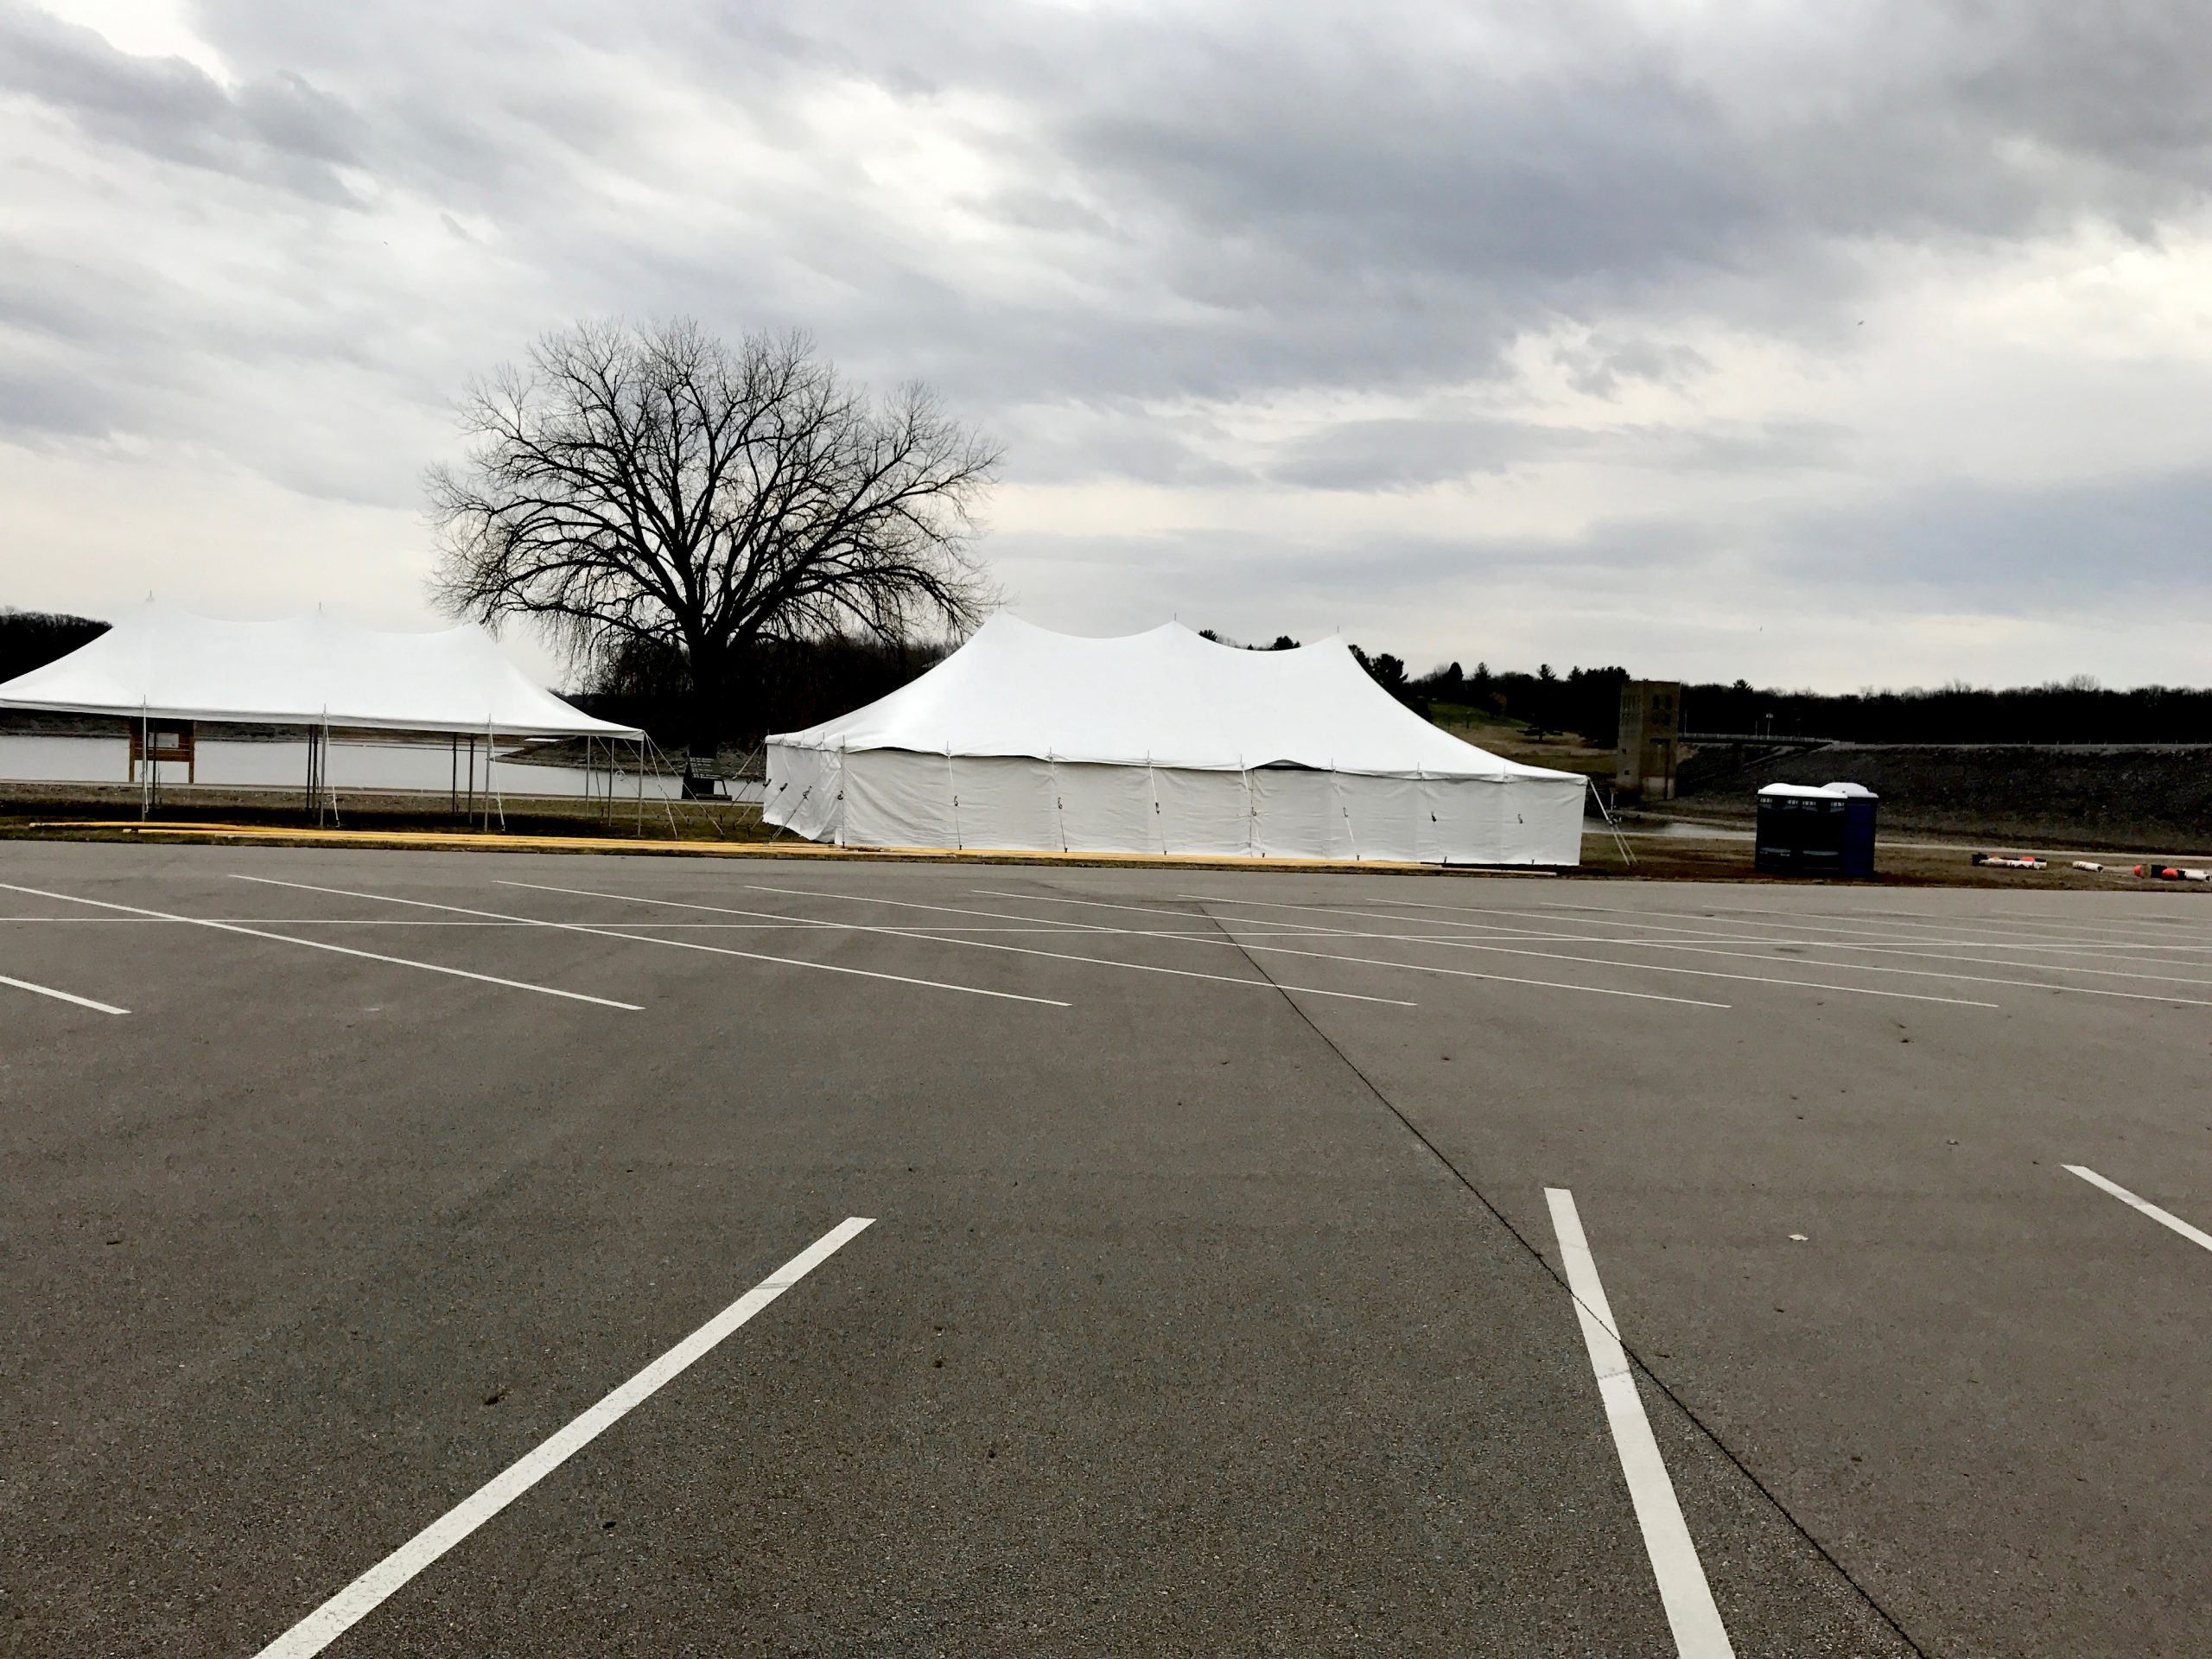 20' x 40' rope and pole tent (left with no side walls), 30' x 60' rope and pole tent (right) for Special Olympics Polar Plunge 2017